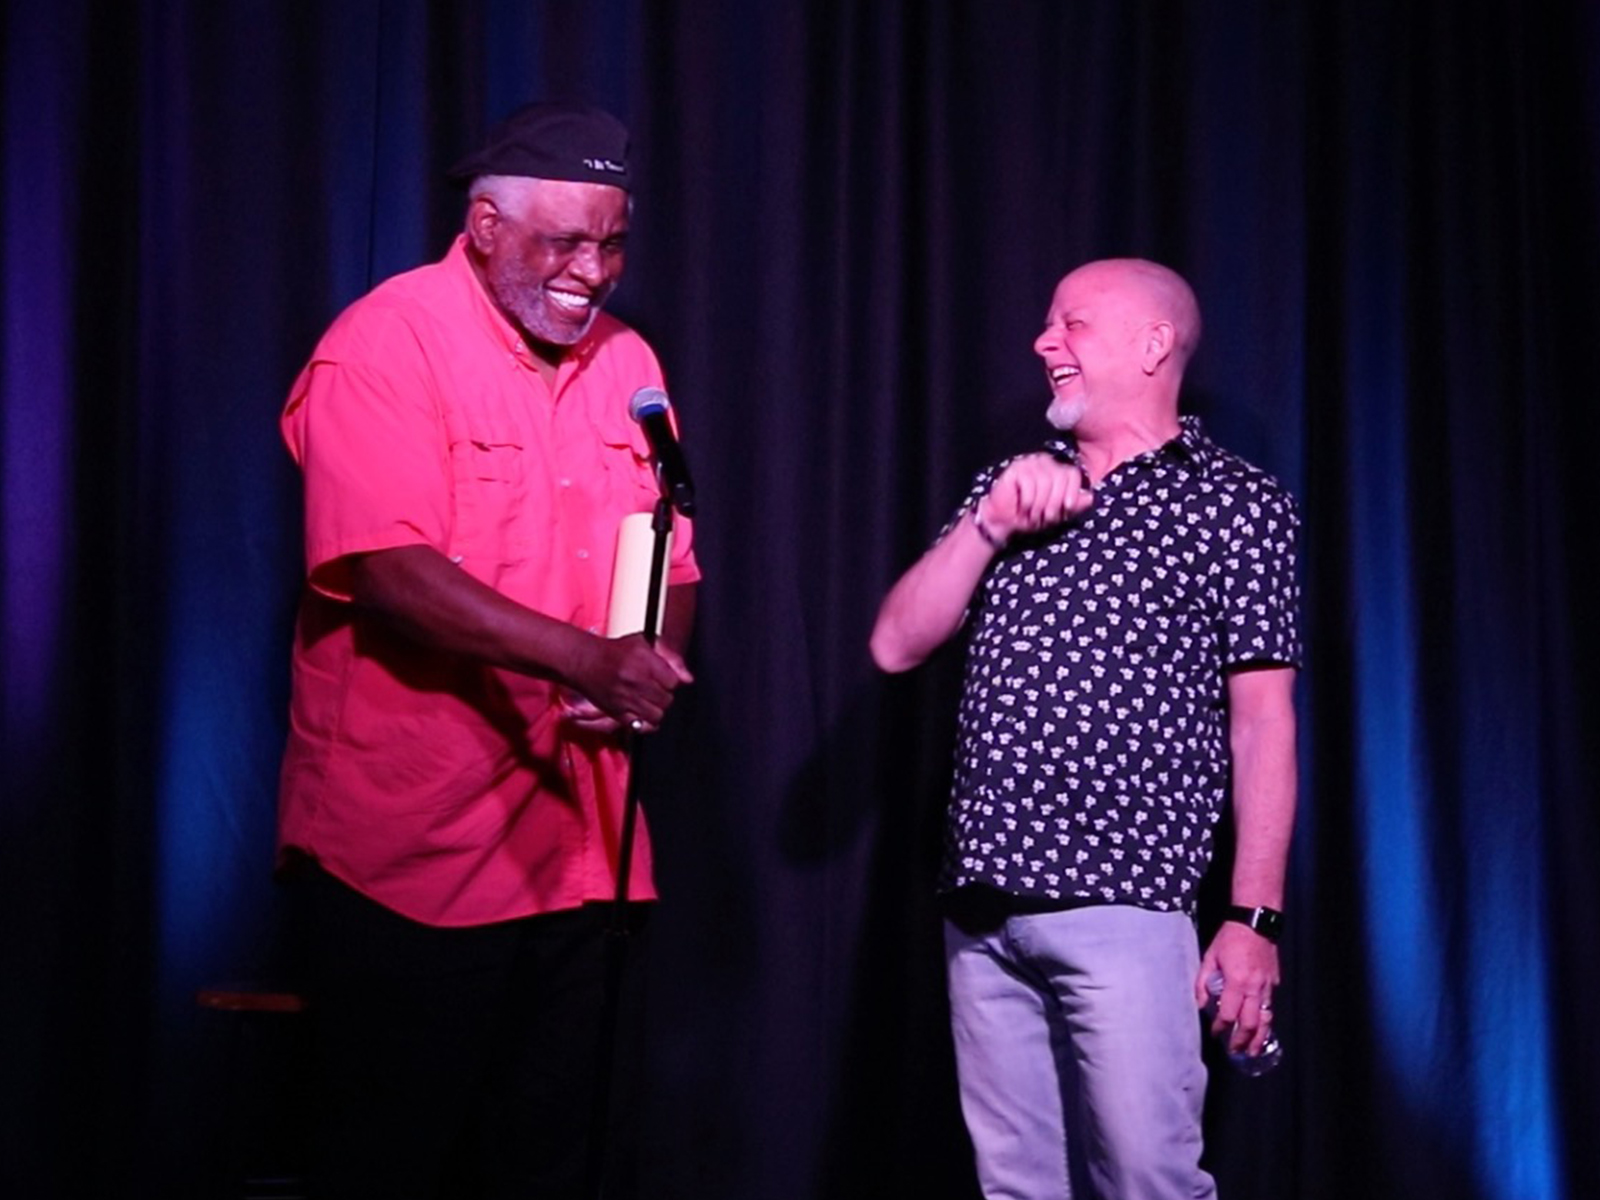 Comedy legend George Wallace joins Don Barnhart onstage at Delirious Comedy Club